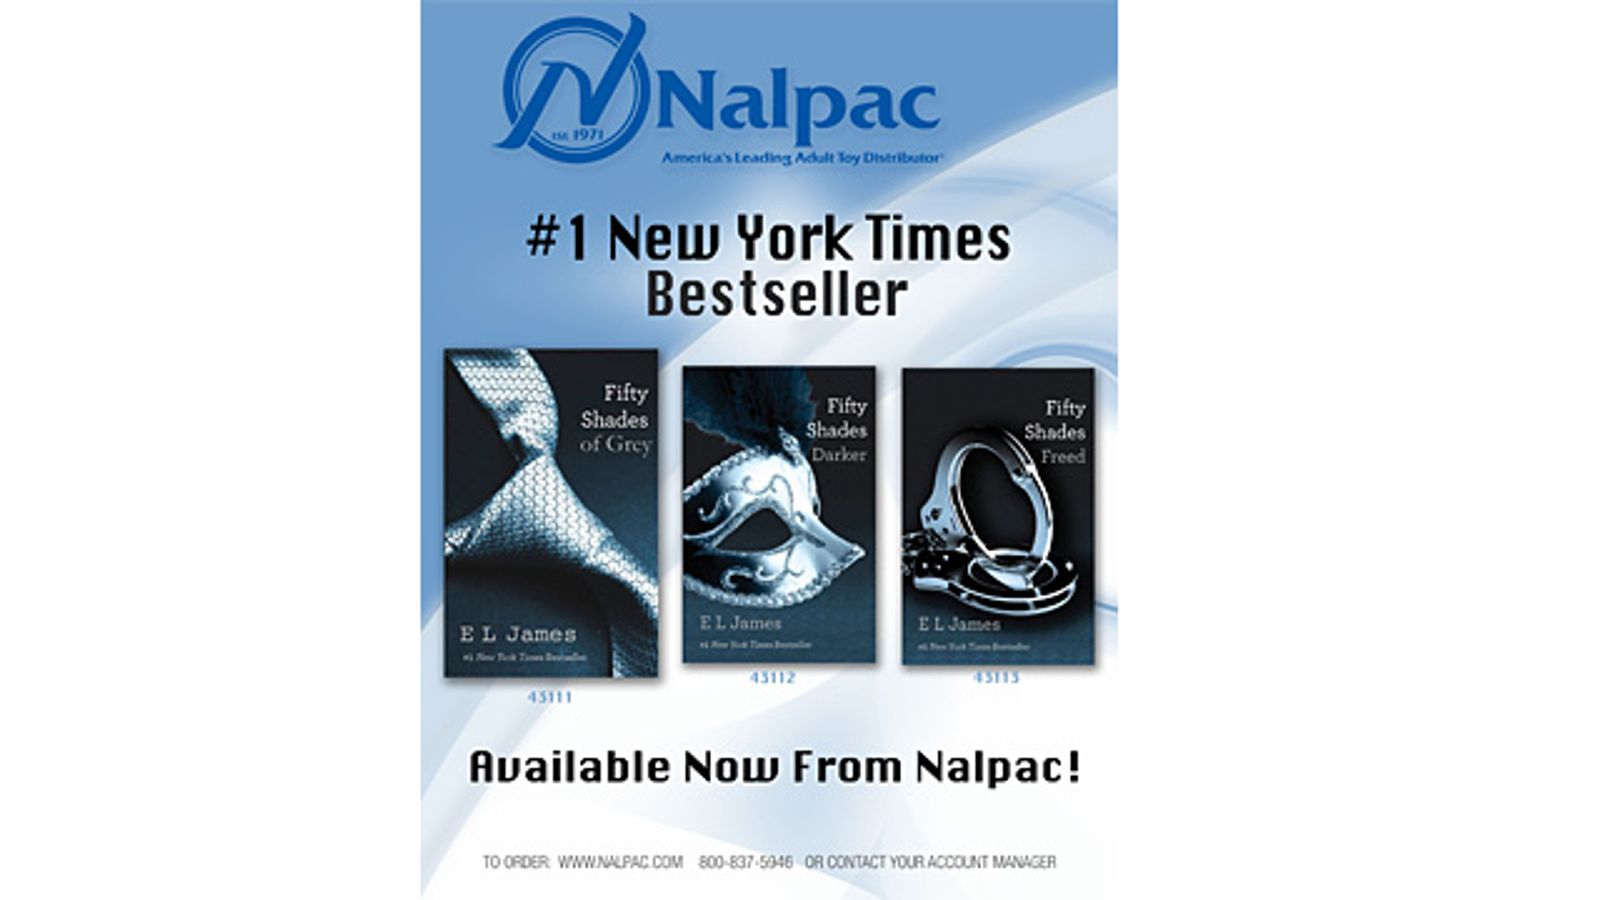 Nalpac Carrying ‘Fifty Shades’ Trilogy